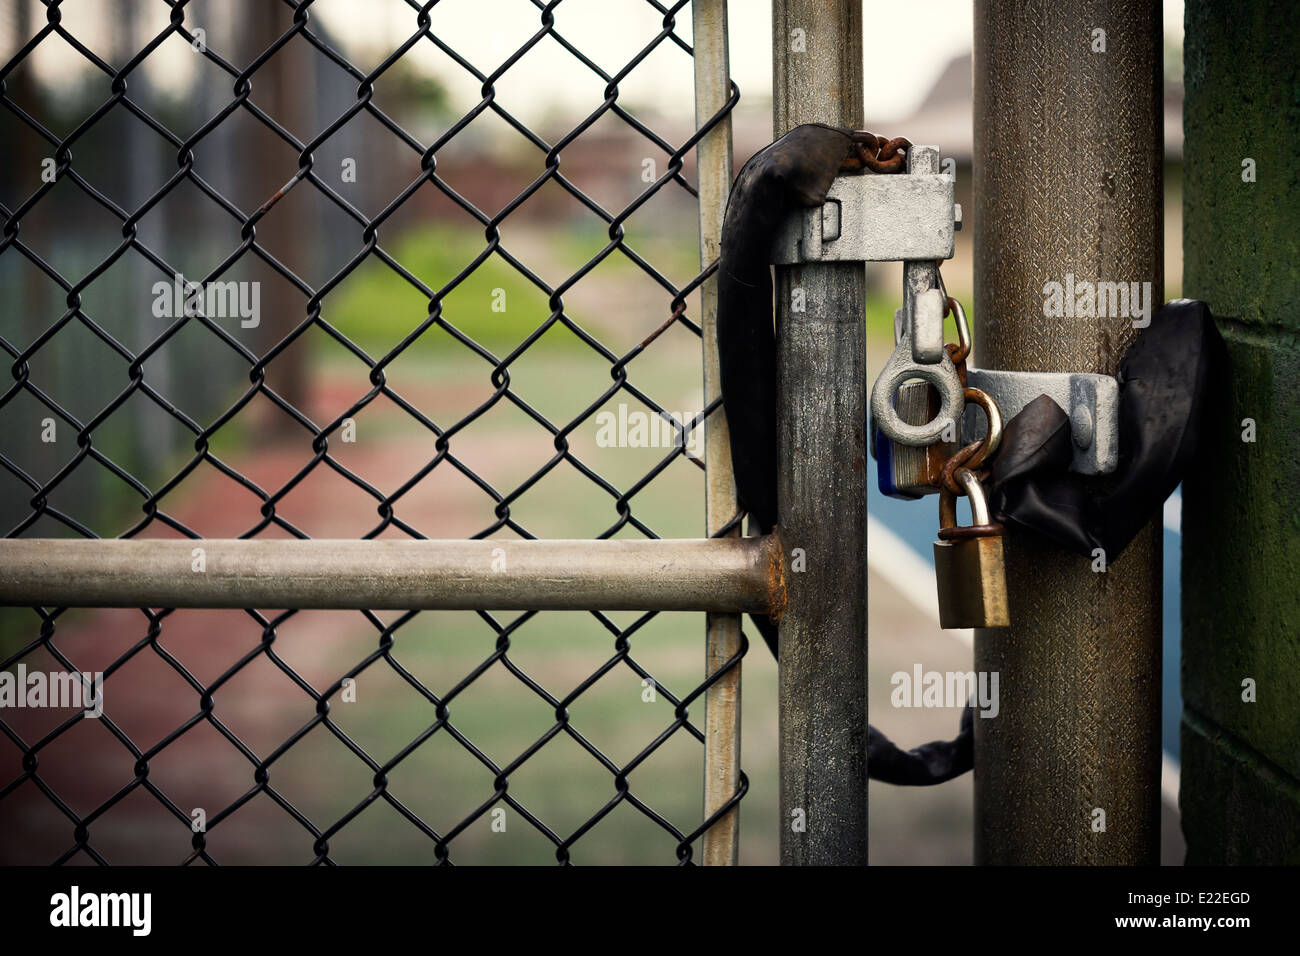 Closeup of a locked padlock securing a metal chain-link gate. Stock Photo